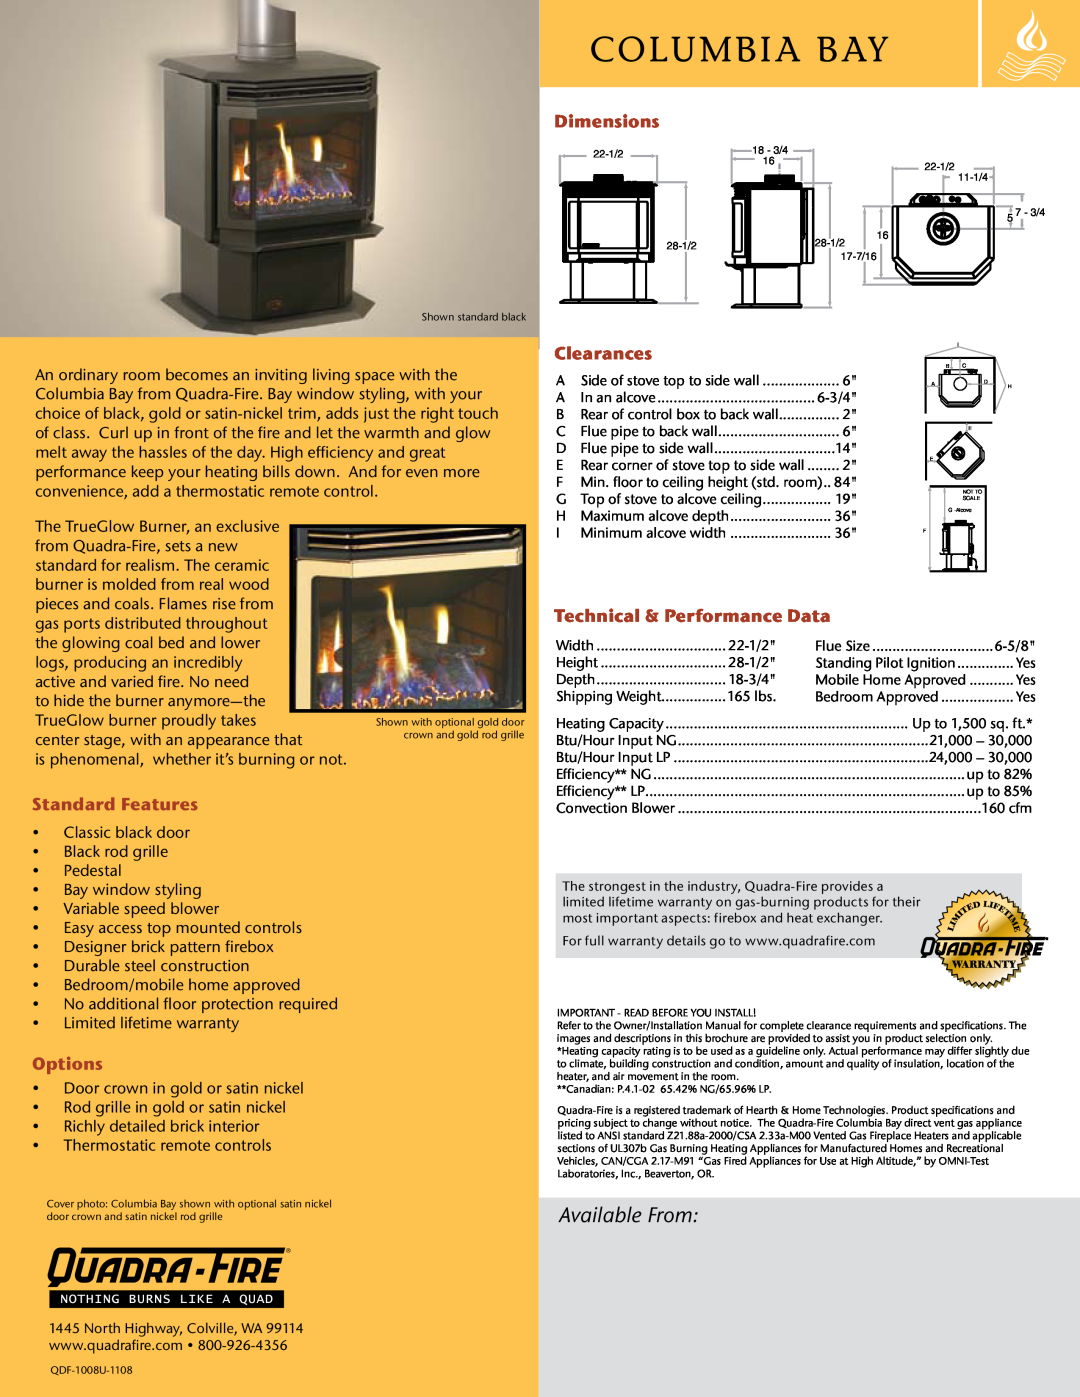 Hearth and Home Technologies Columbia Bay Available From, Dimensions, Clearances, Technical & Performance Data, Options 